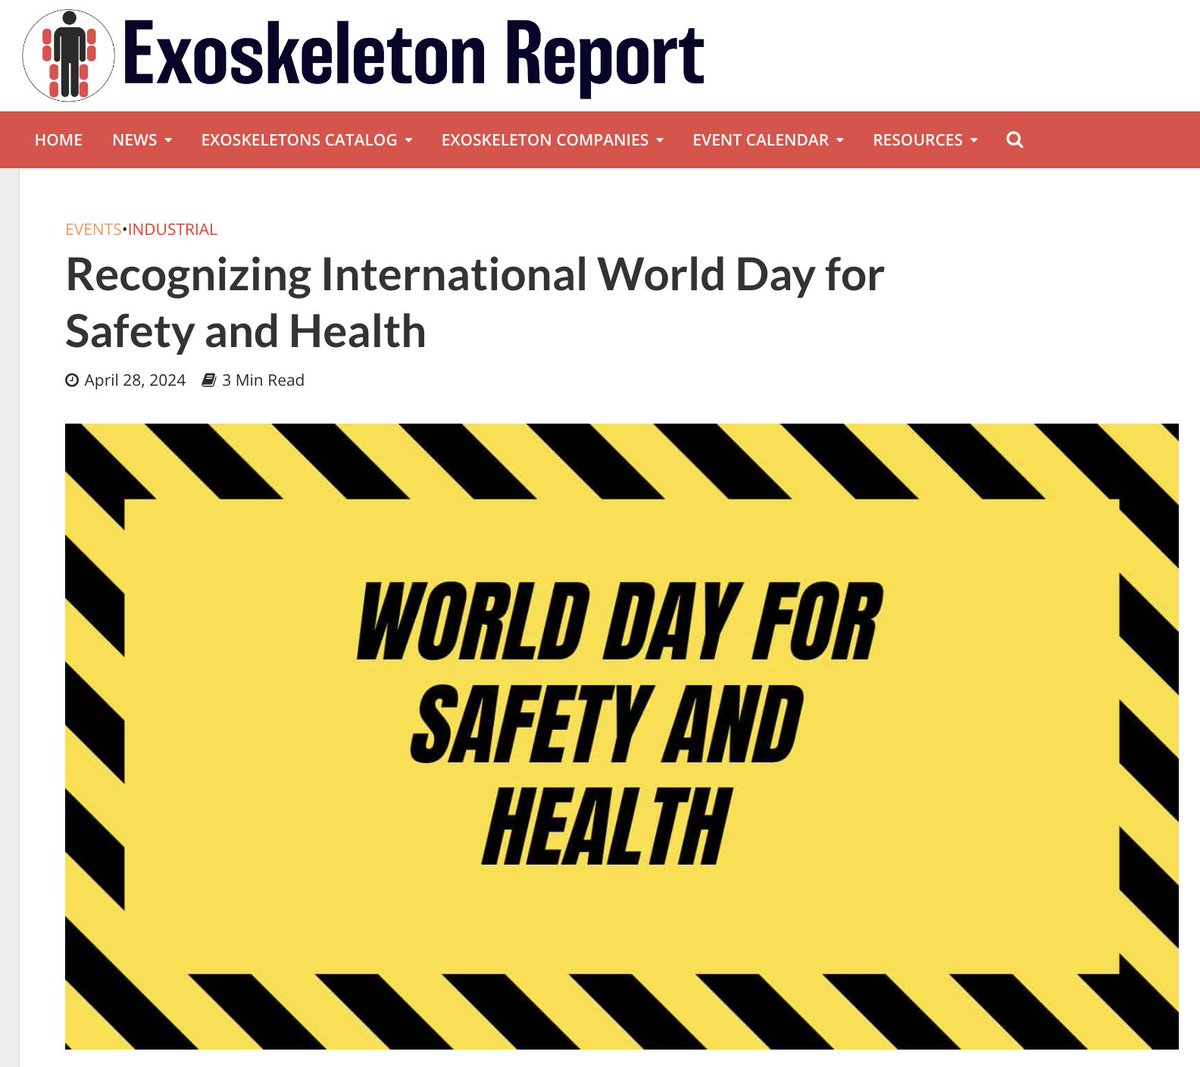 👏🏽 Check out this thought-provoking article about International World Day for Safety and Health, and the envisioned role of #exoskeletons and #exosuits.